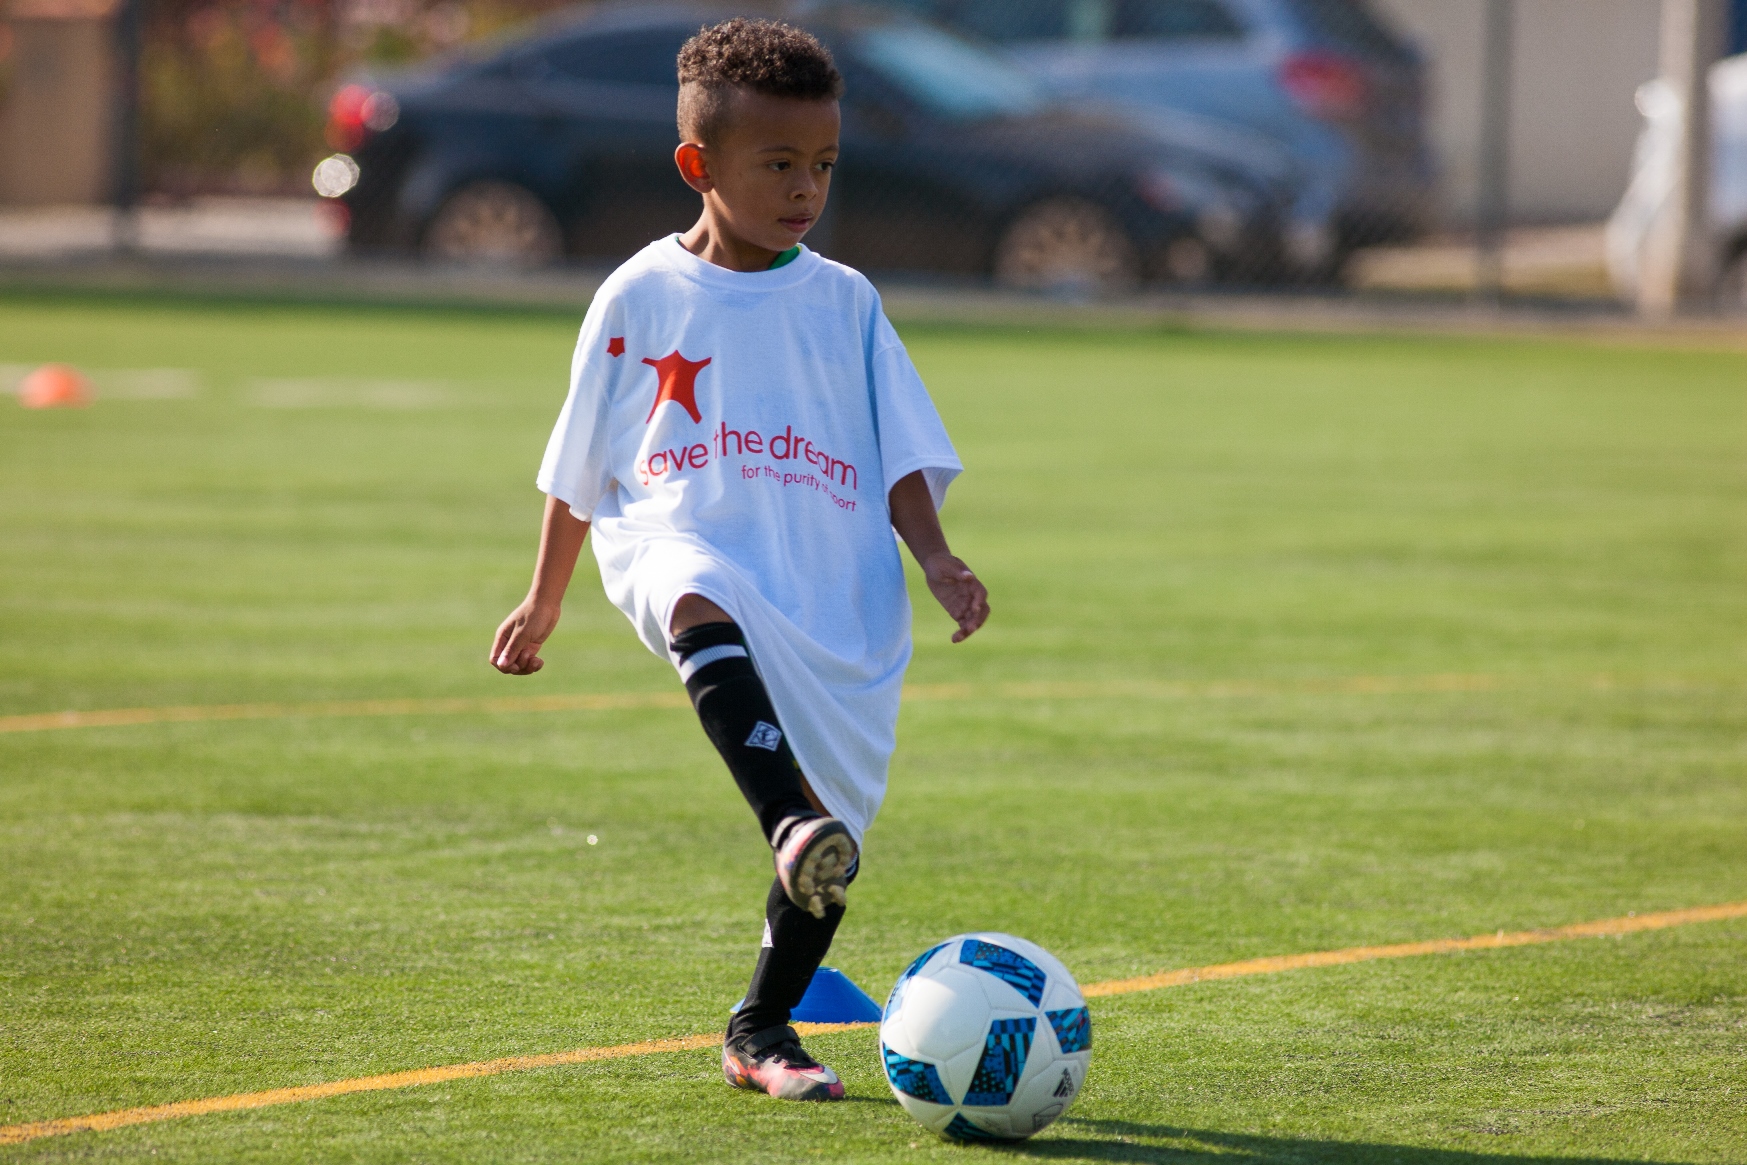 Save the Dream provides access to sport for children from underprivileged communities in Los Angeles